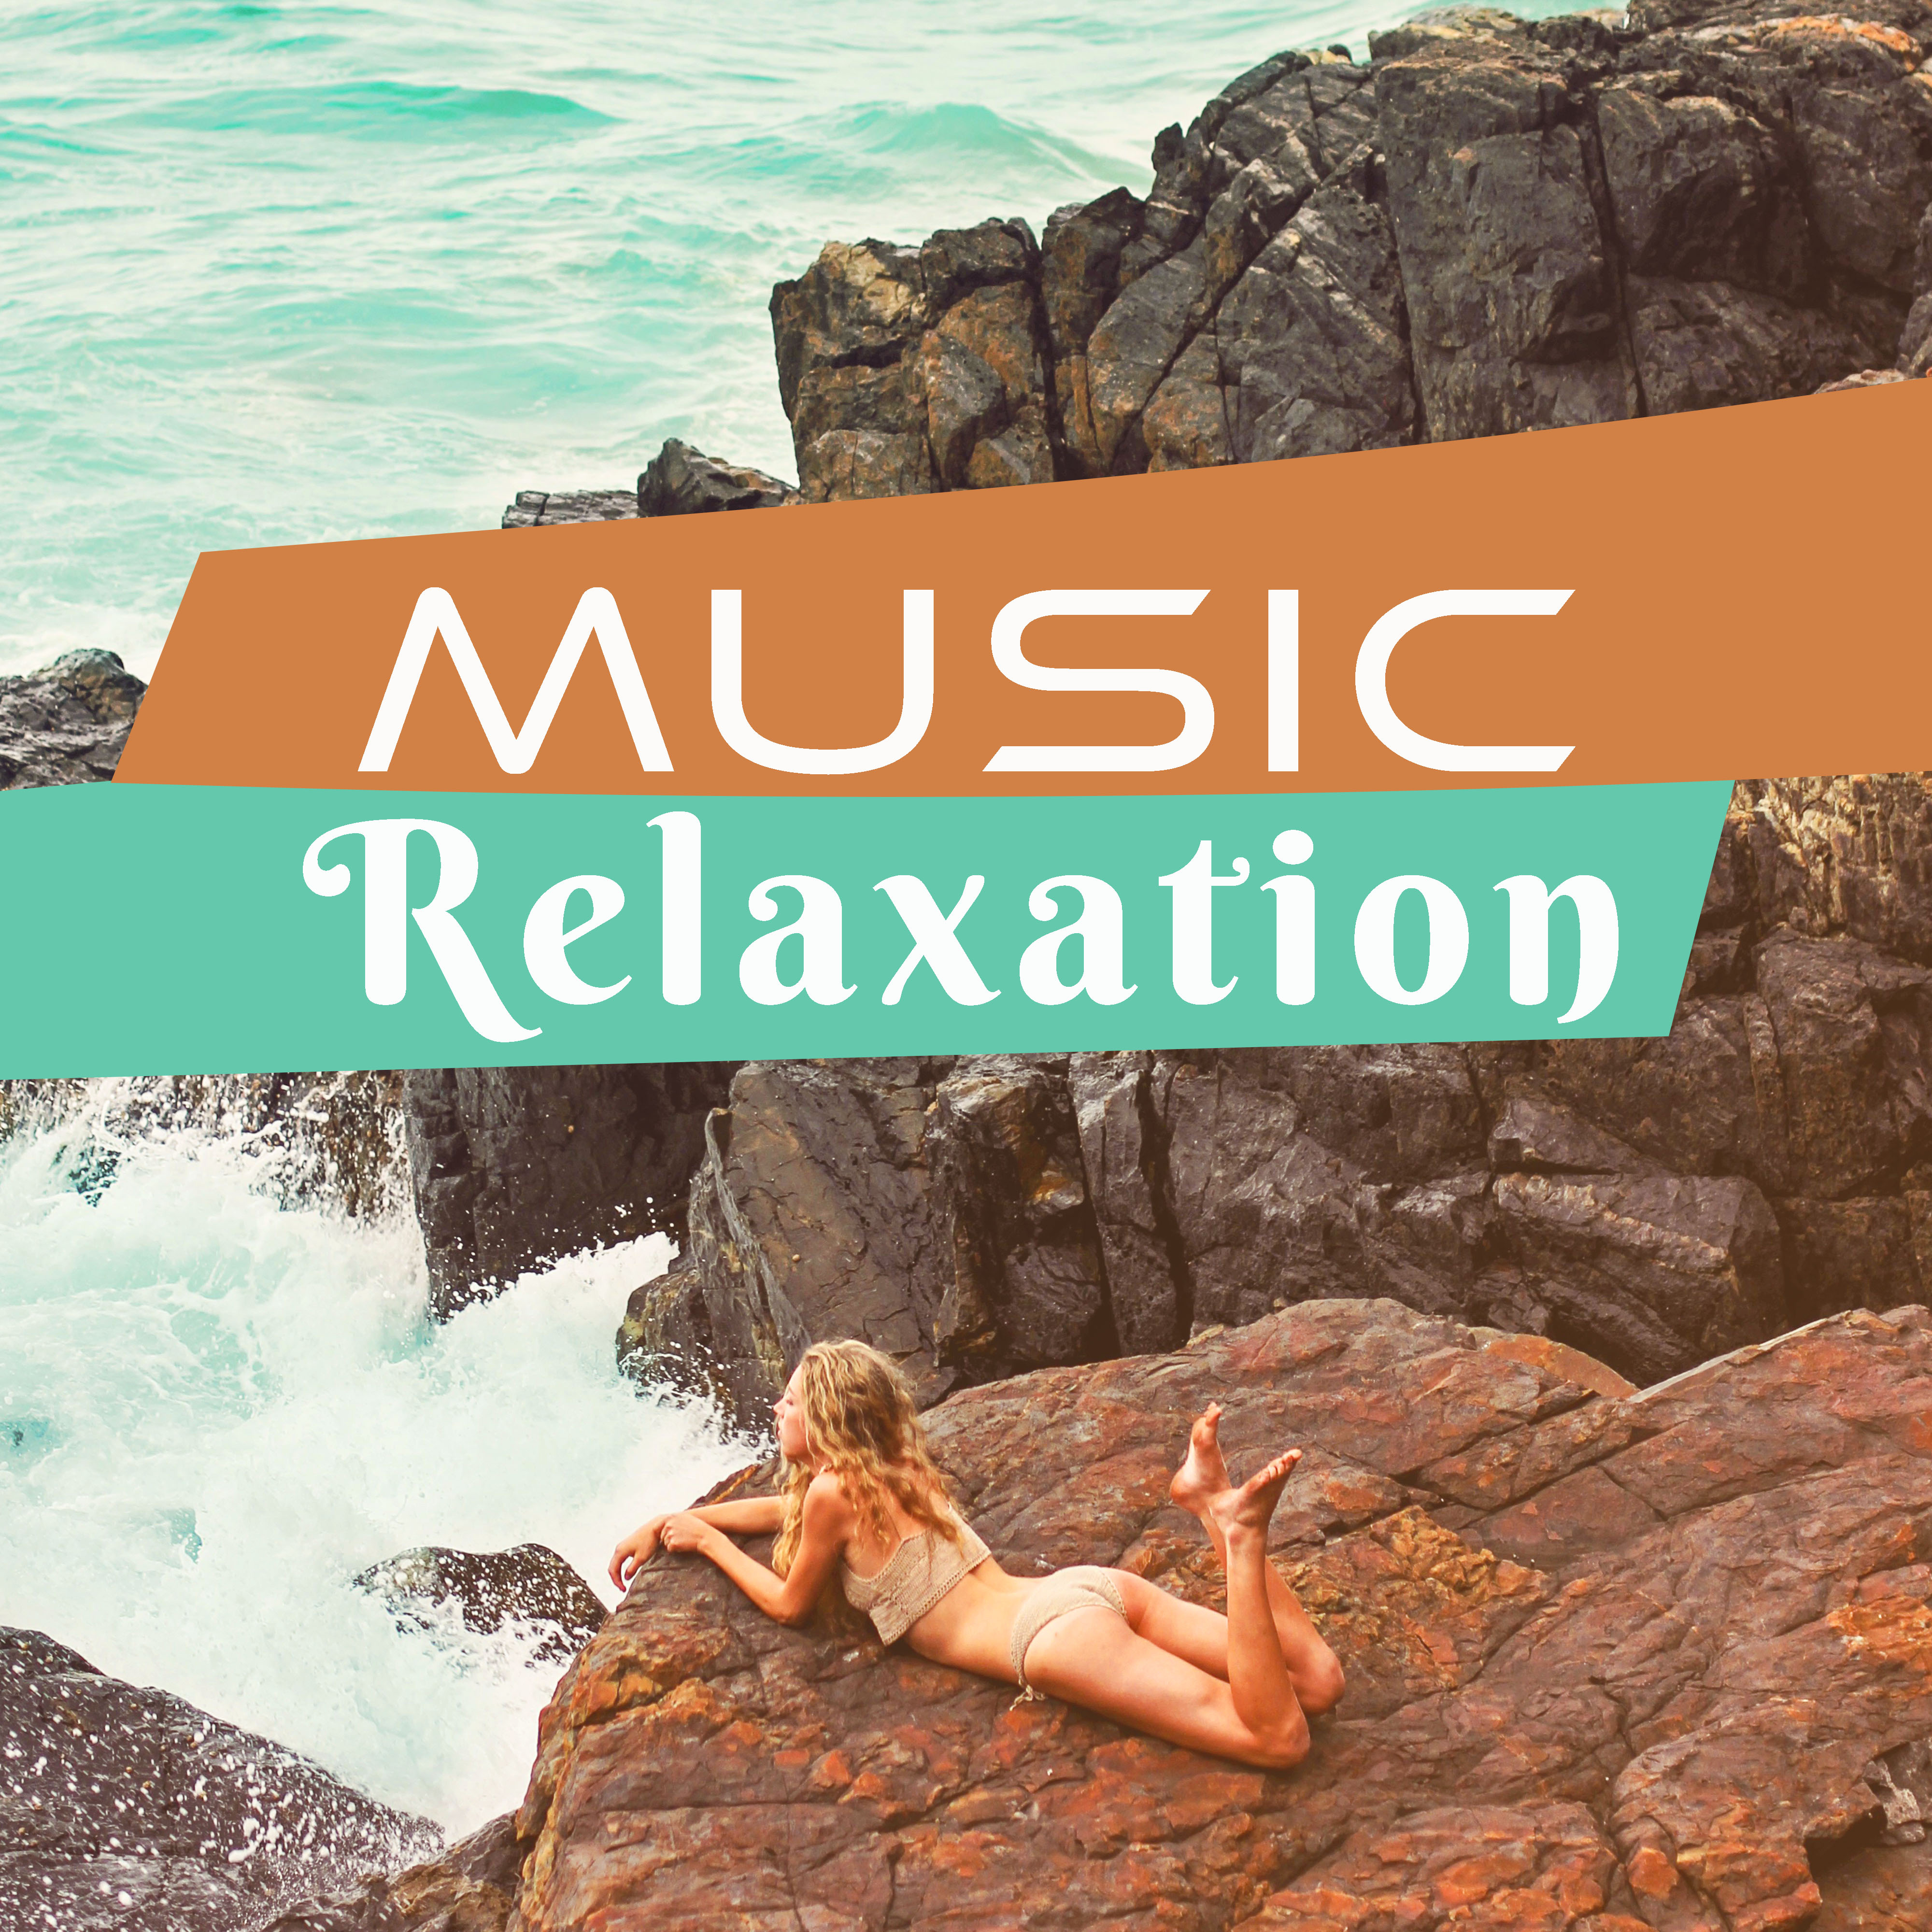 Music Relaxation  Therapy Sounds, Chill Out 2017, Summer Chill, Electronic Beats, Calm Down, Ibiza Lounge